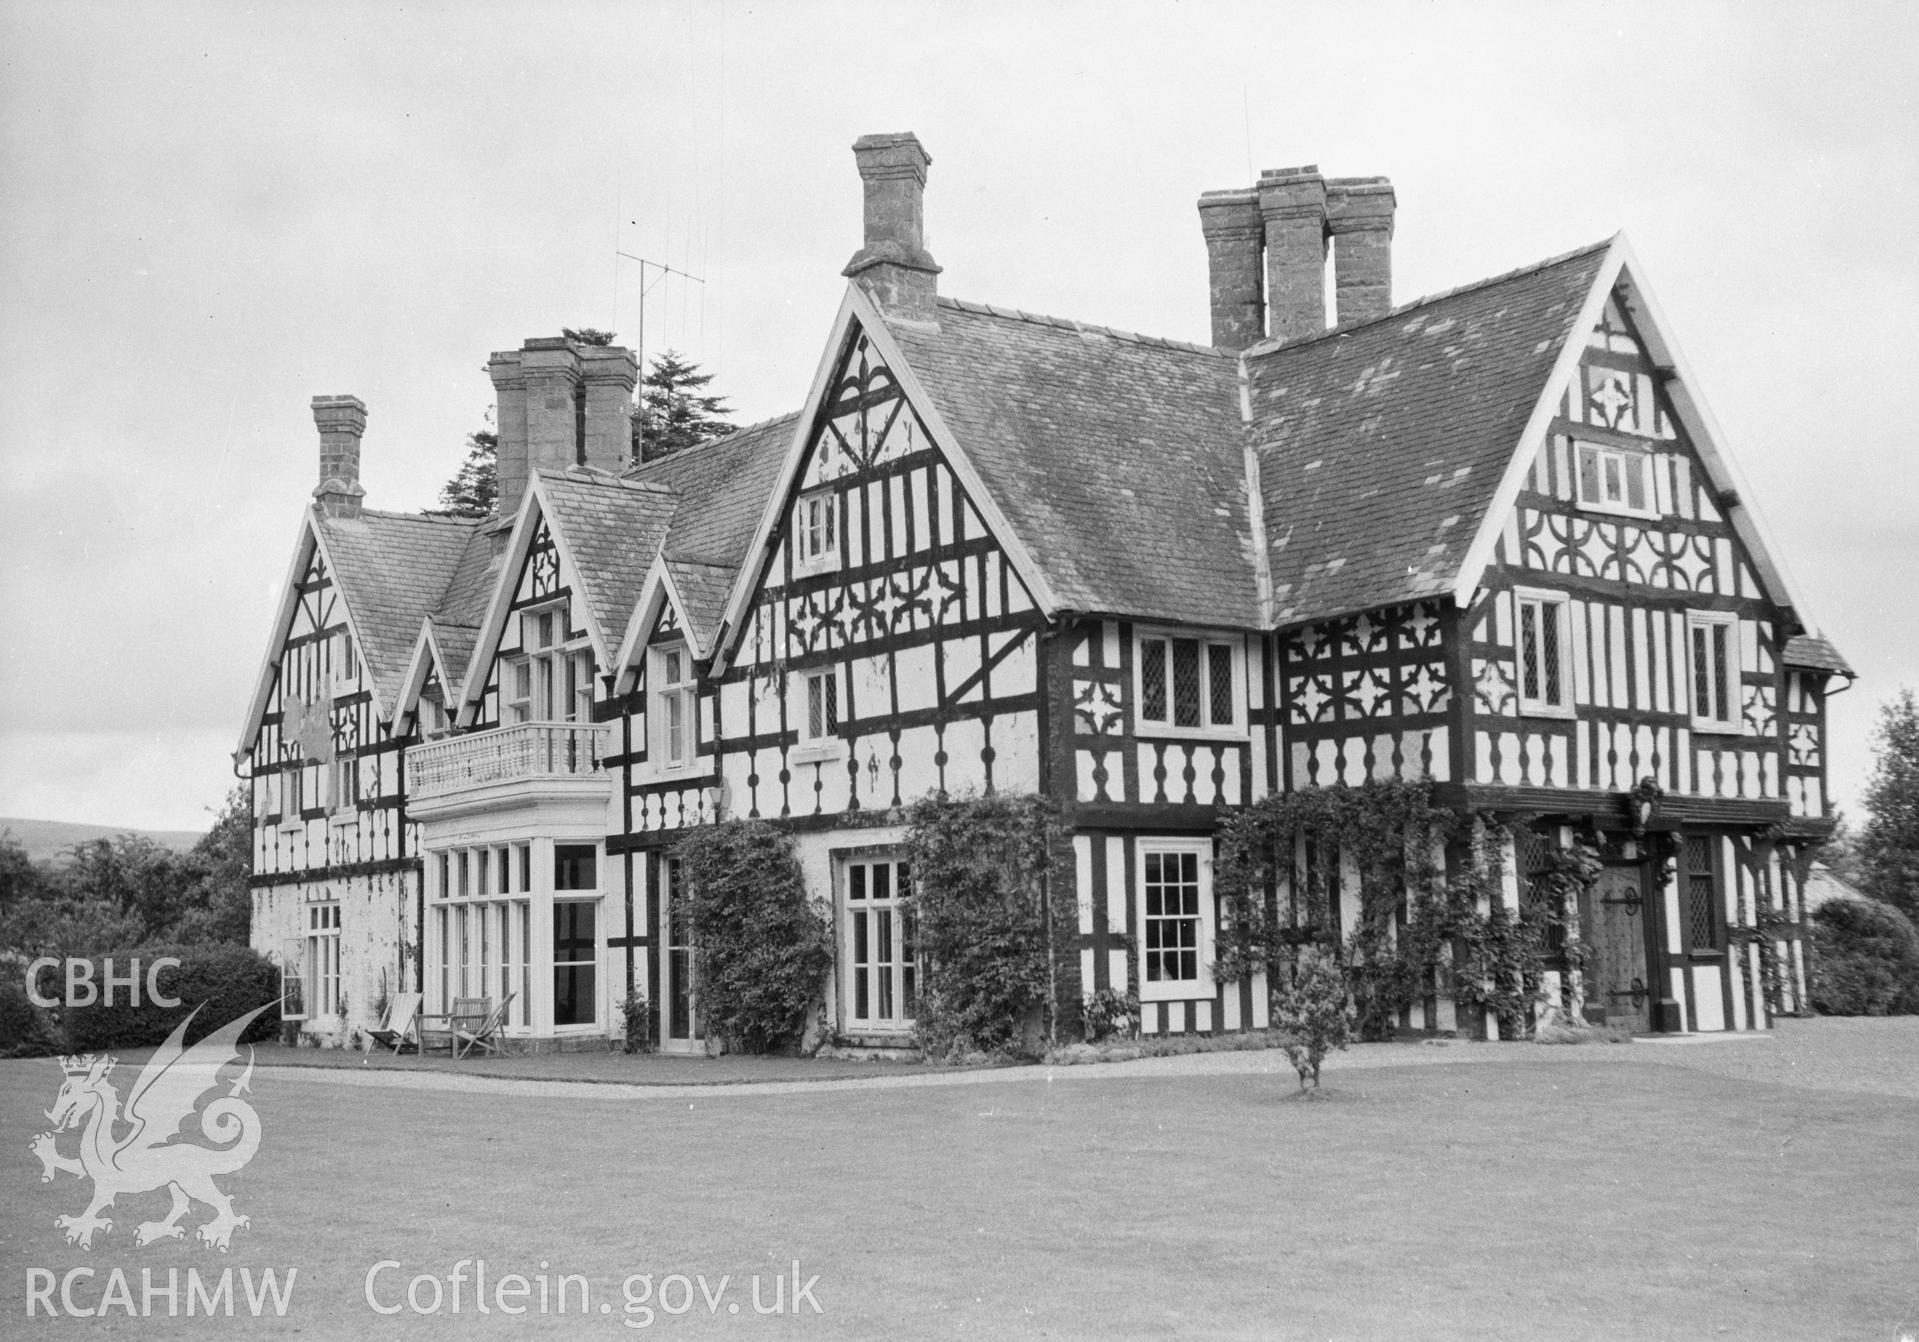 Digital copy of a nitrate negative showing view of Maesmawr Hall.